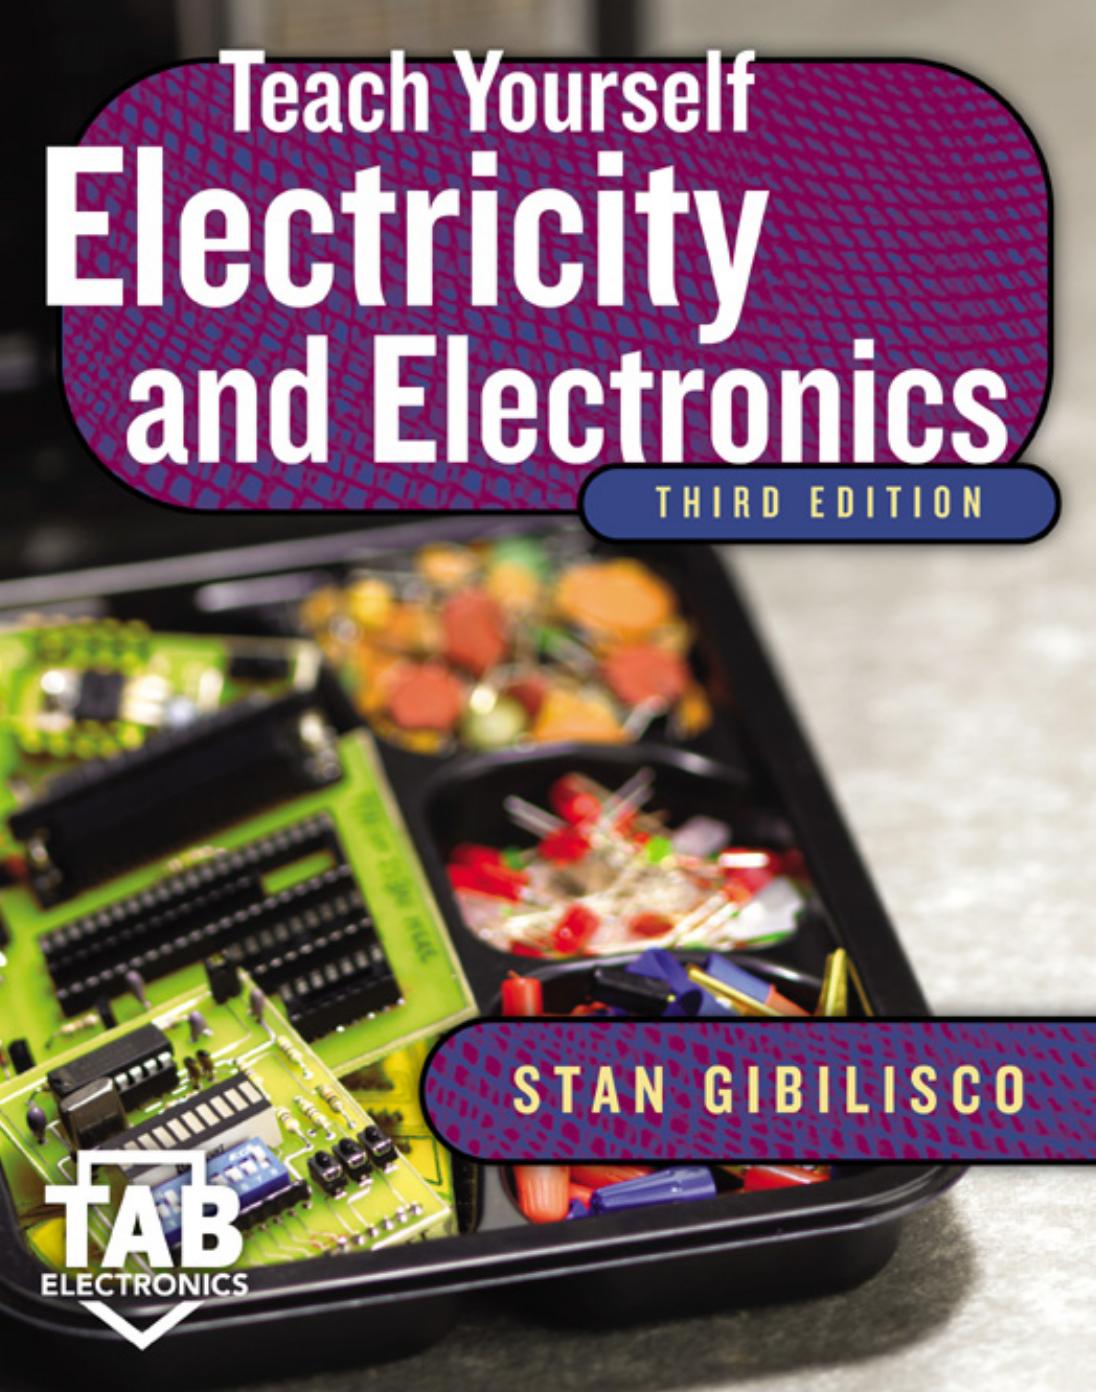 Teach Yourself Electricity and Electronics by Stan Gibilisco